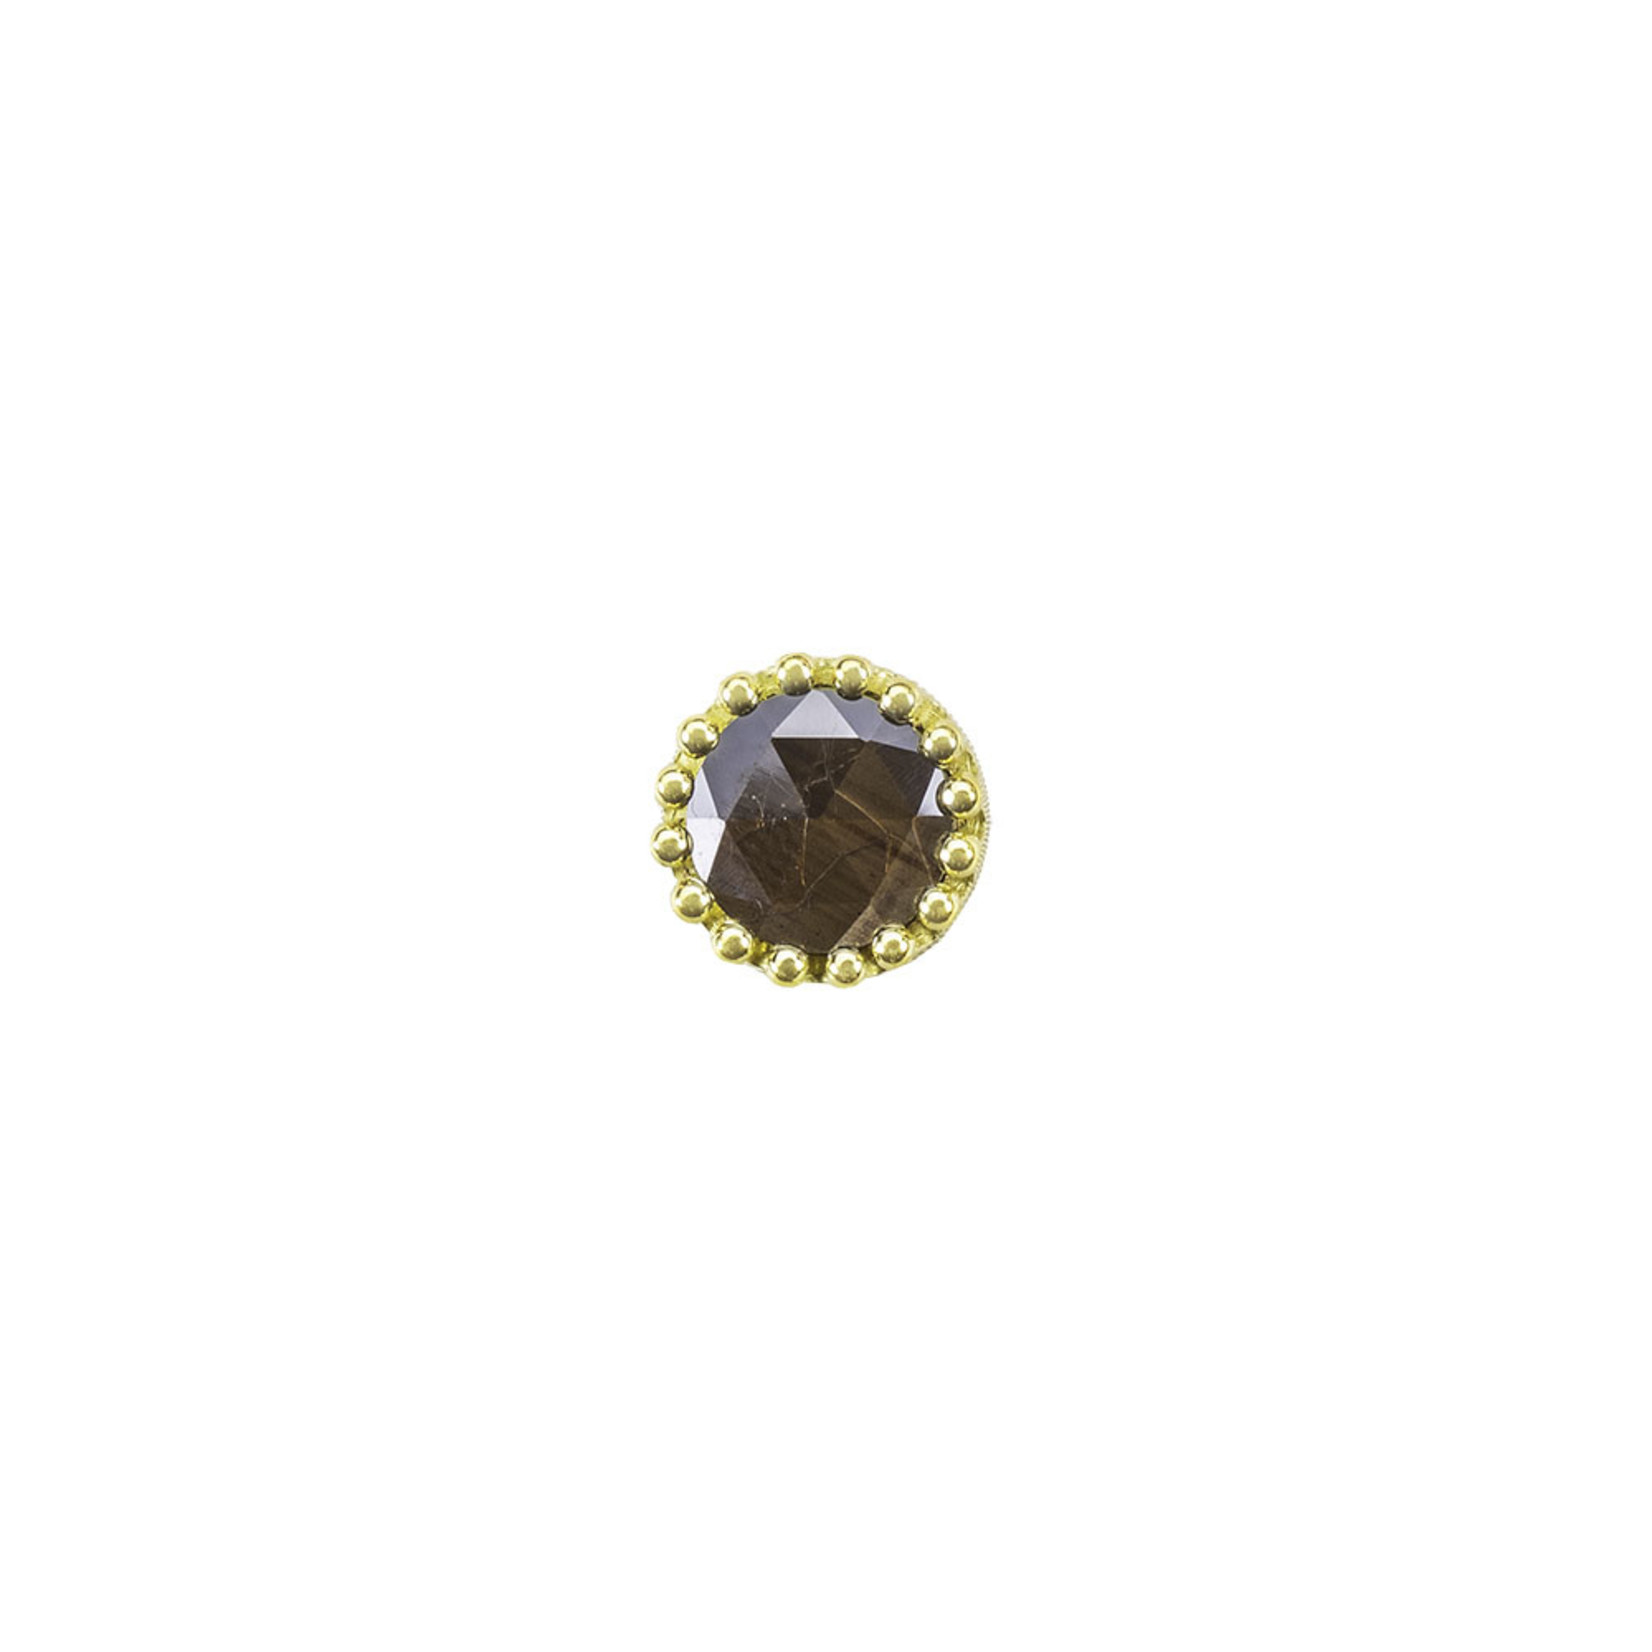 BVLA BVLA 14g yellow gold 14g 8.5 crown prong threaded end with 7.0 Zawadi sapphire